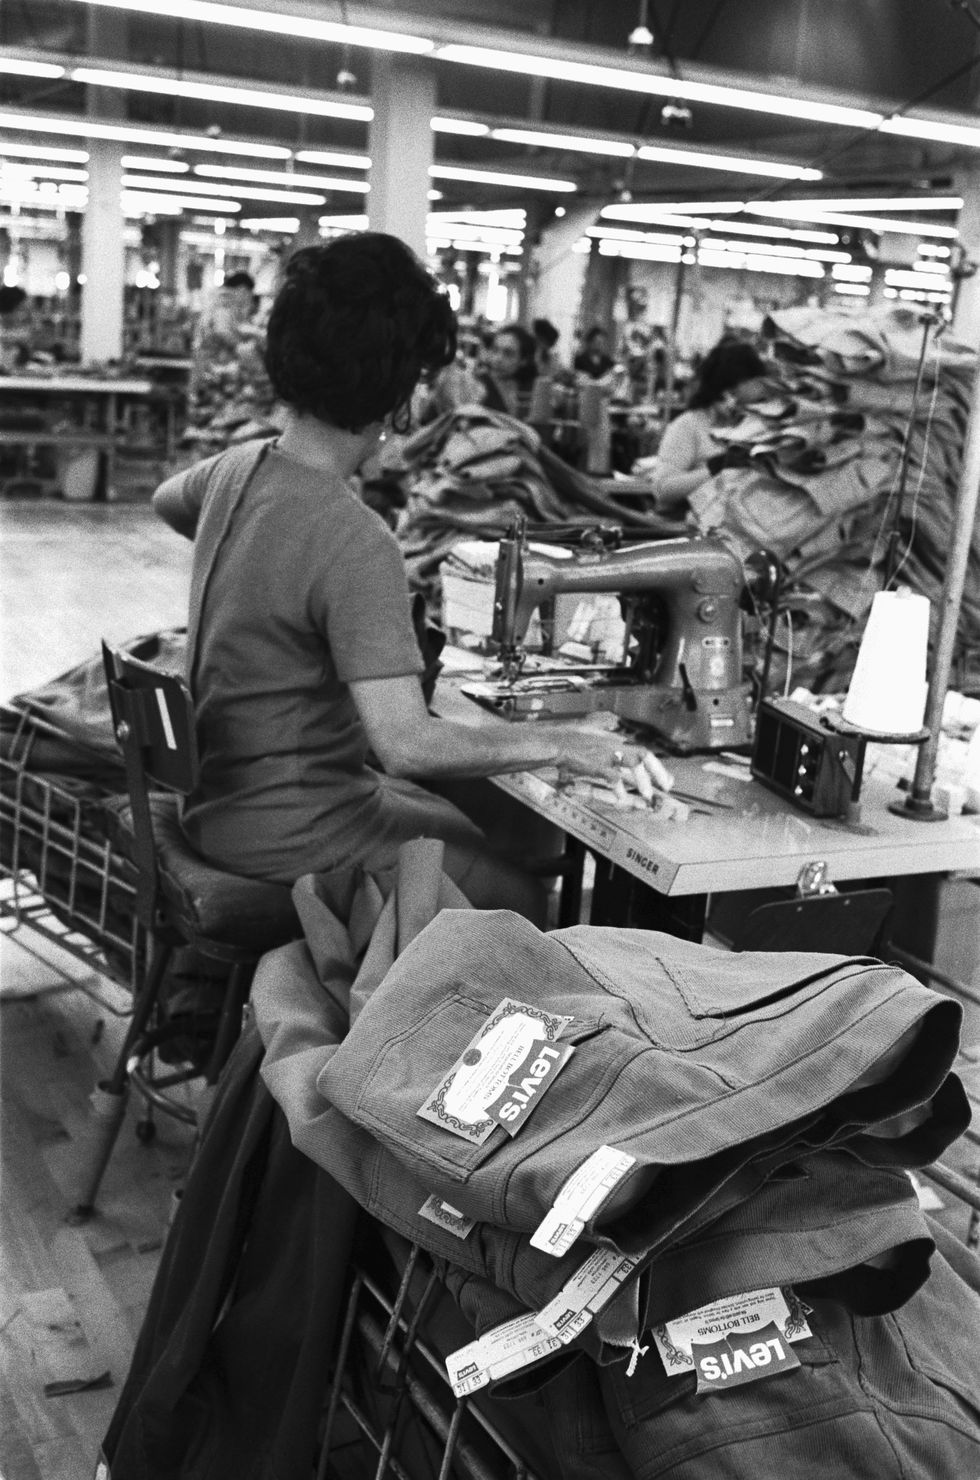 Sewing Jeans at Levi Strauss Plant